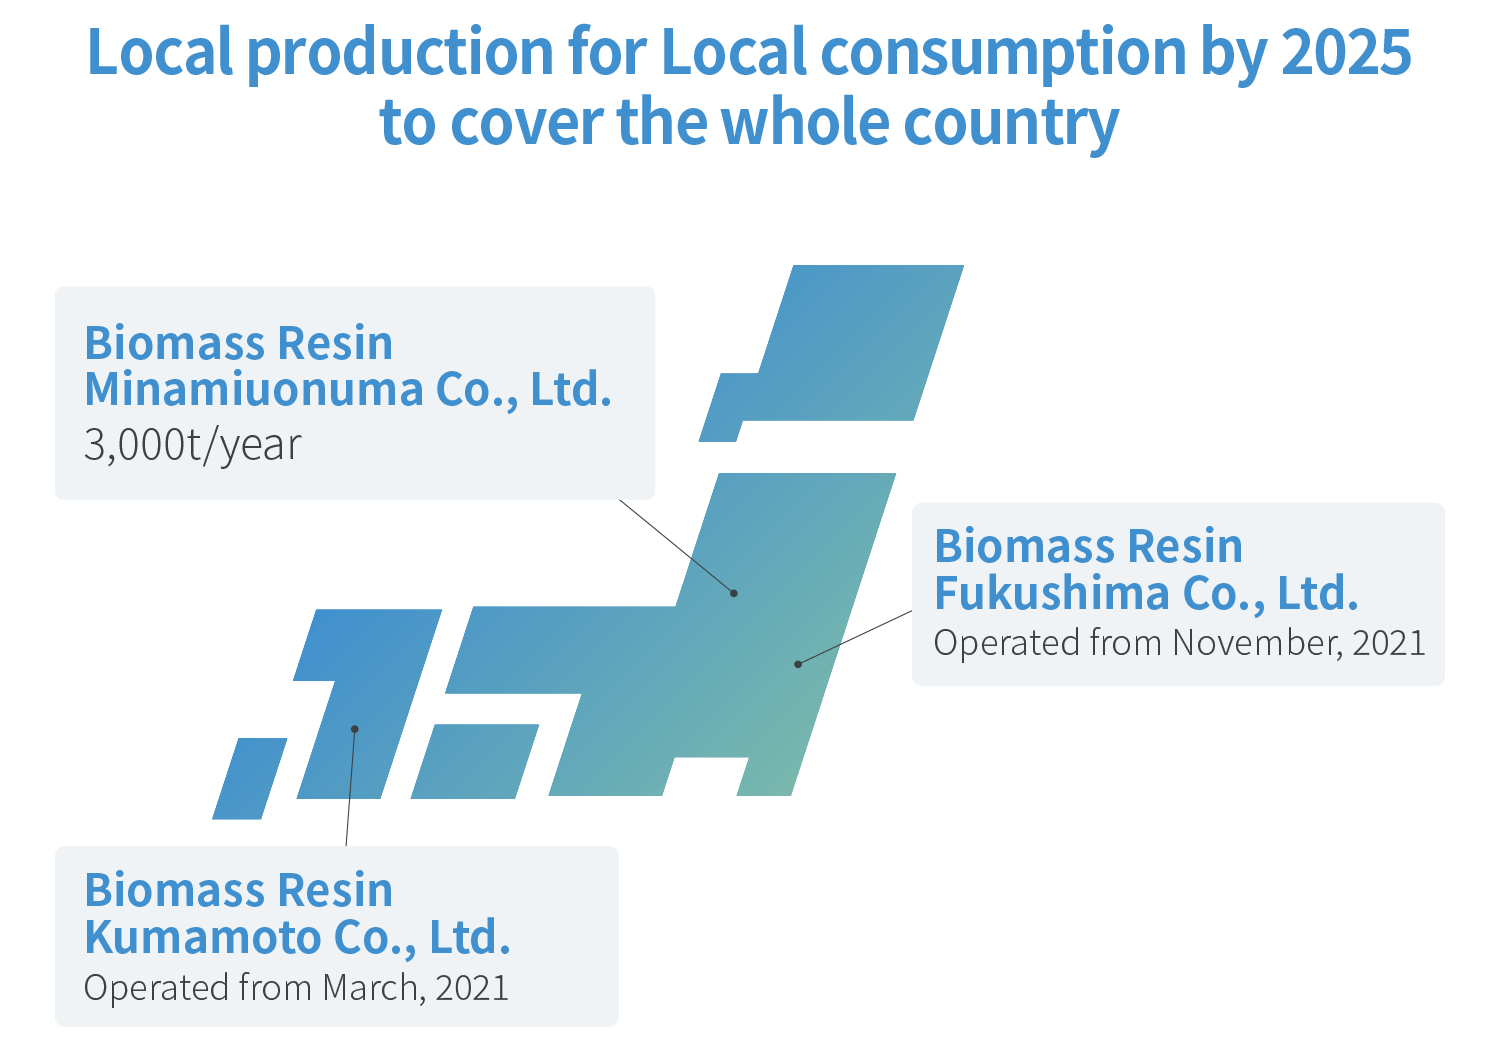 Local production for Local consumption by 2025 to cover the whole country